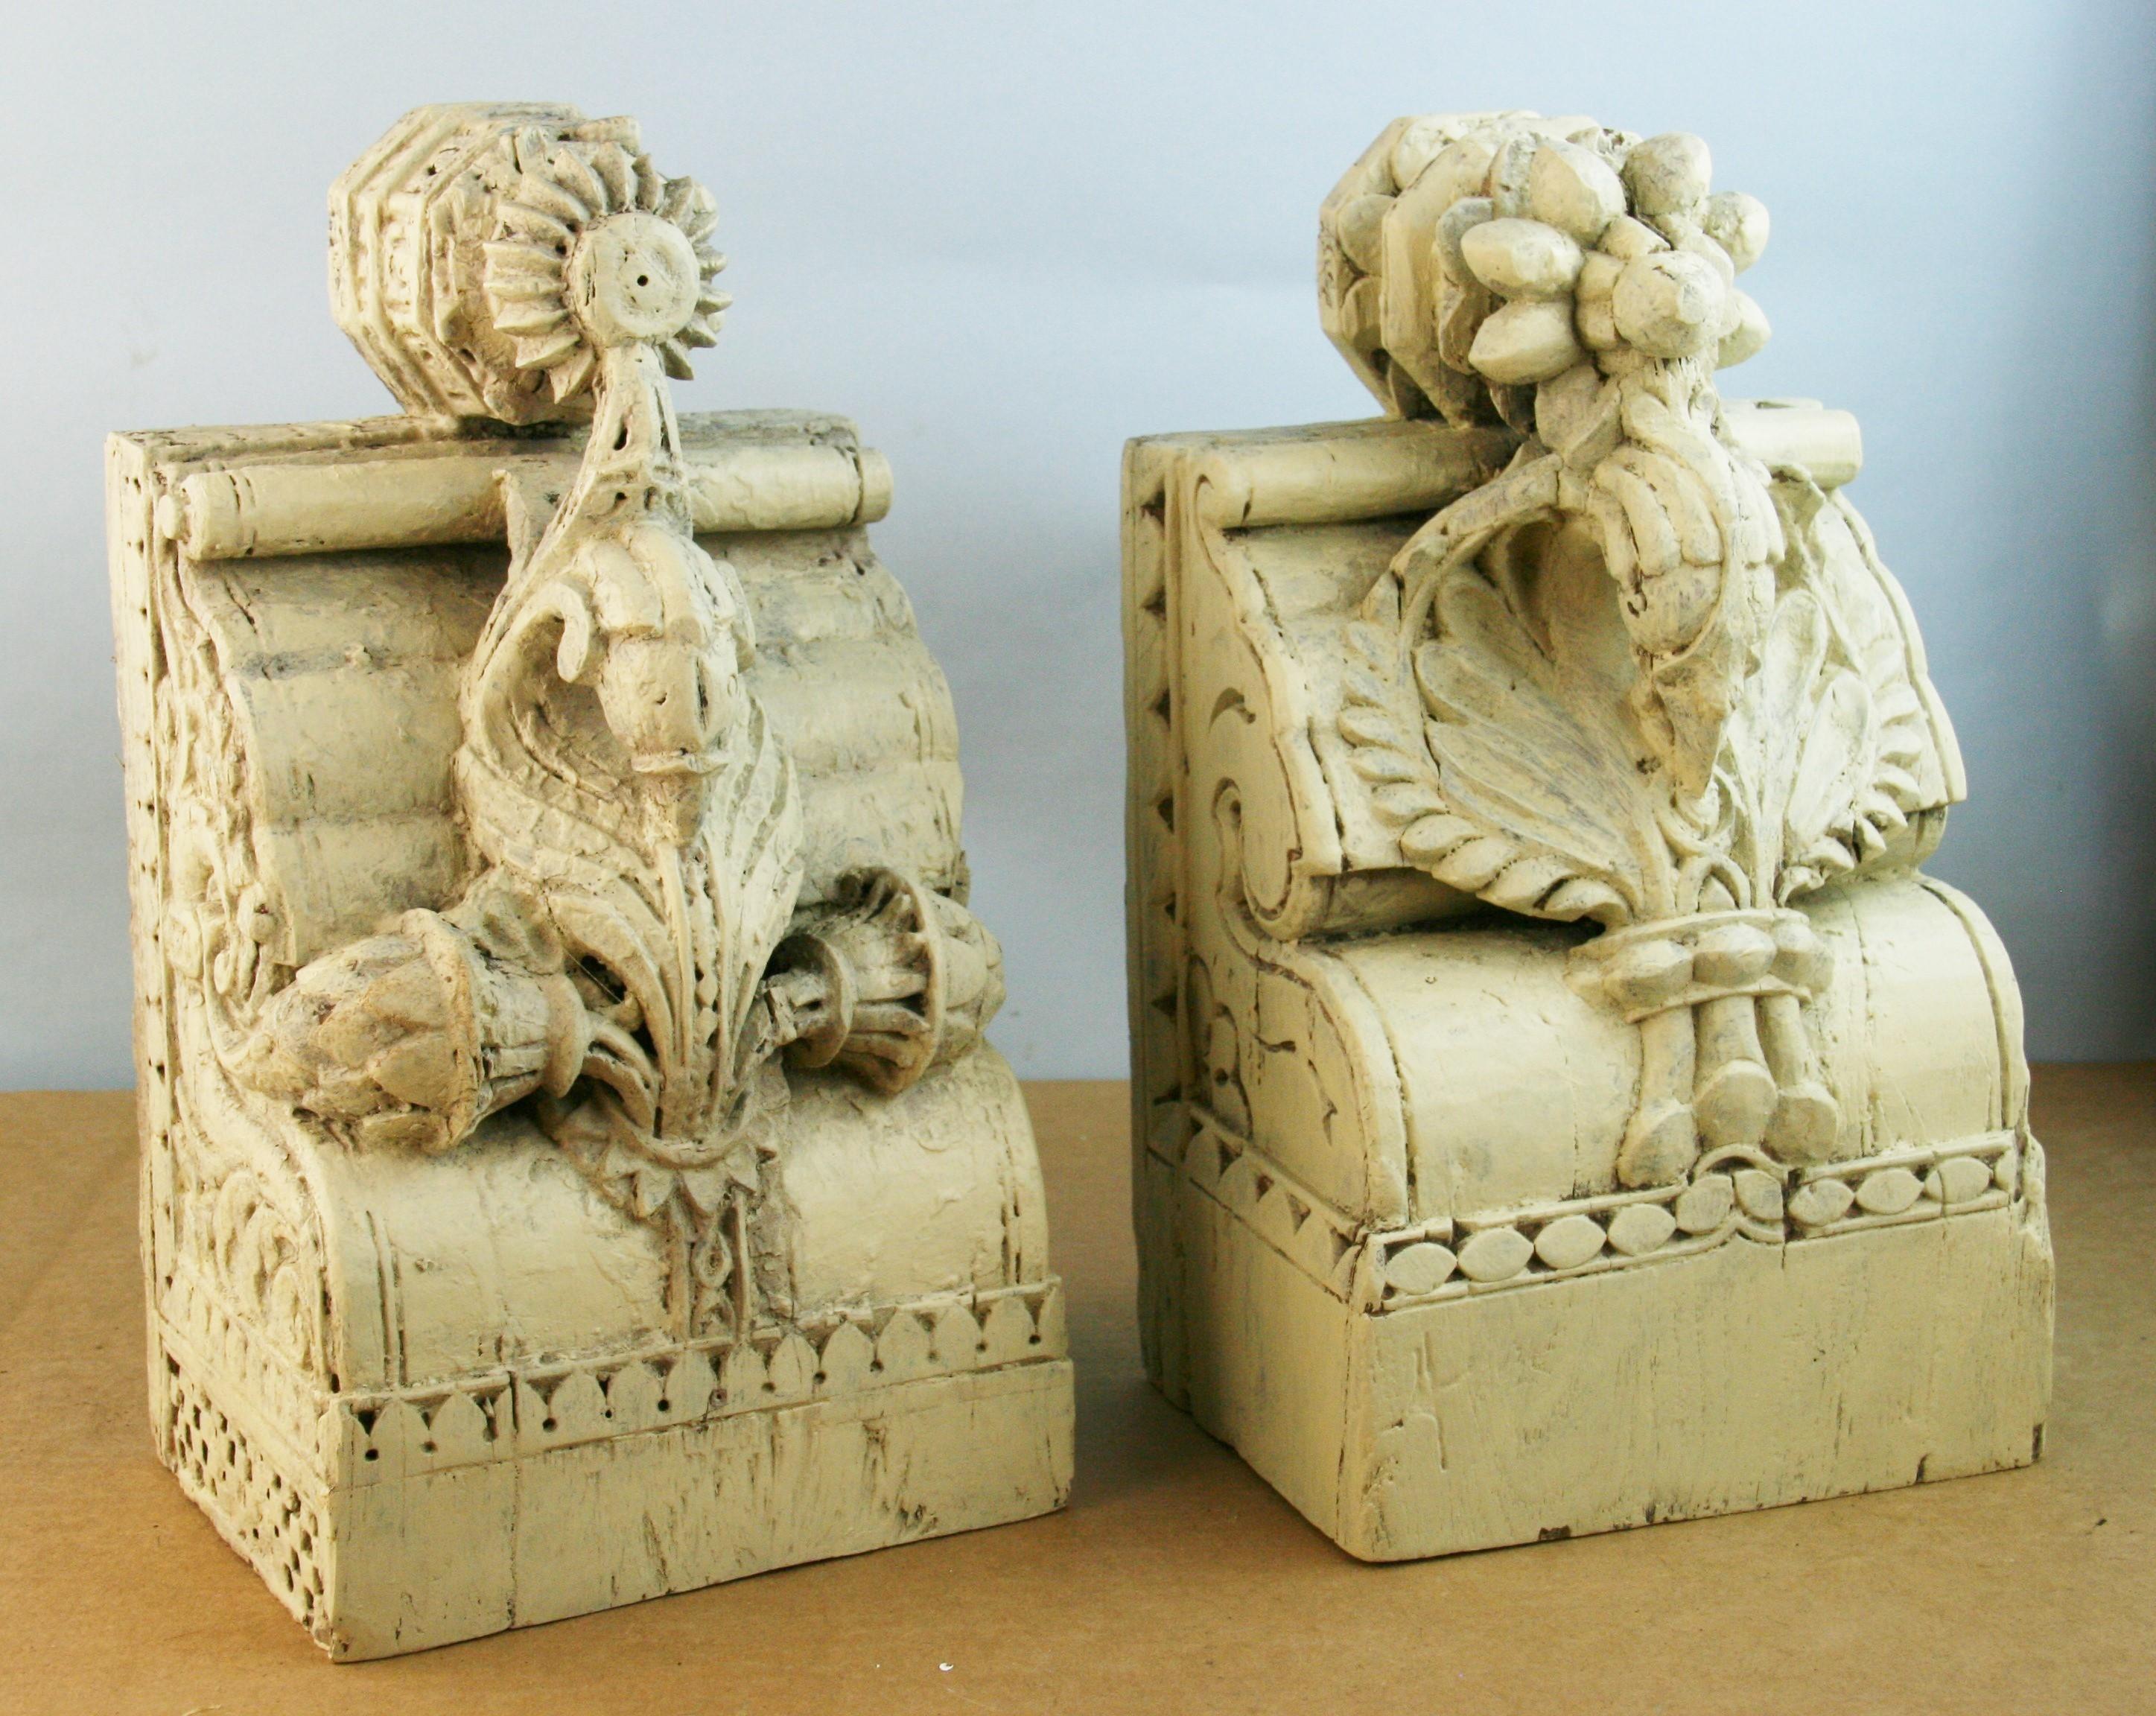 Pair of Indian Architectural temple carved wood fragments.
Can be used a corbels or wall brackets.